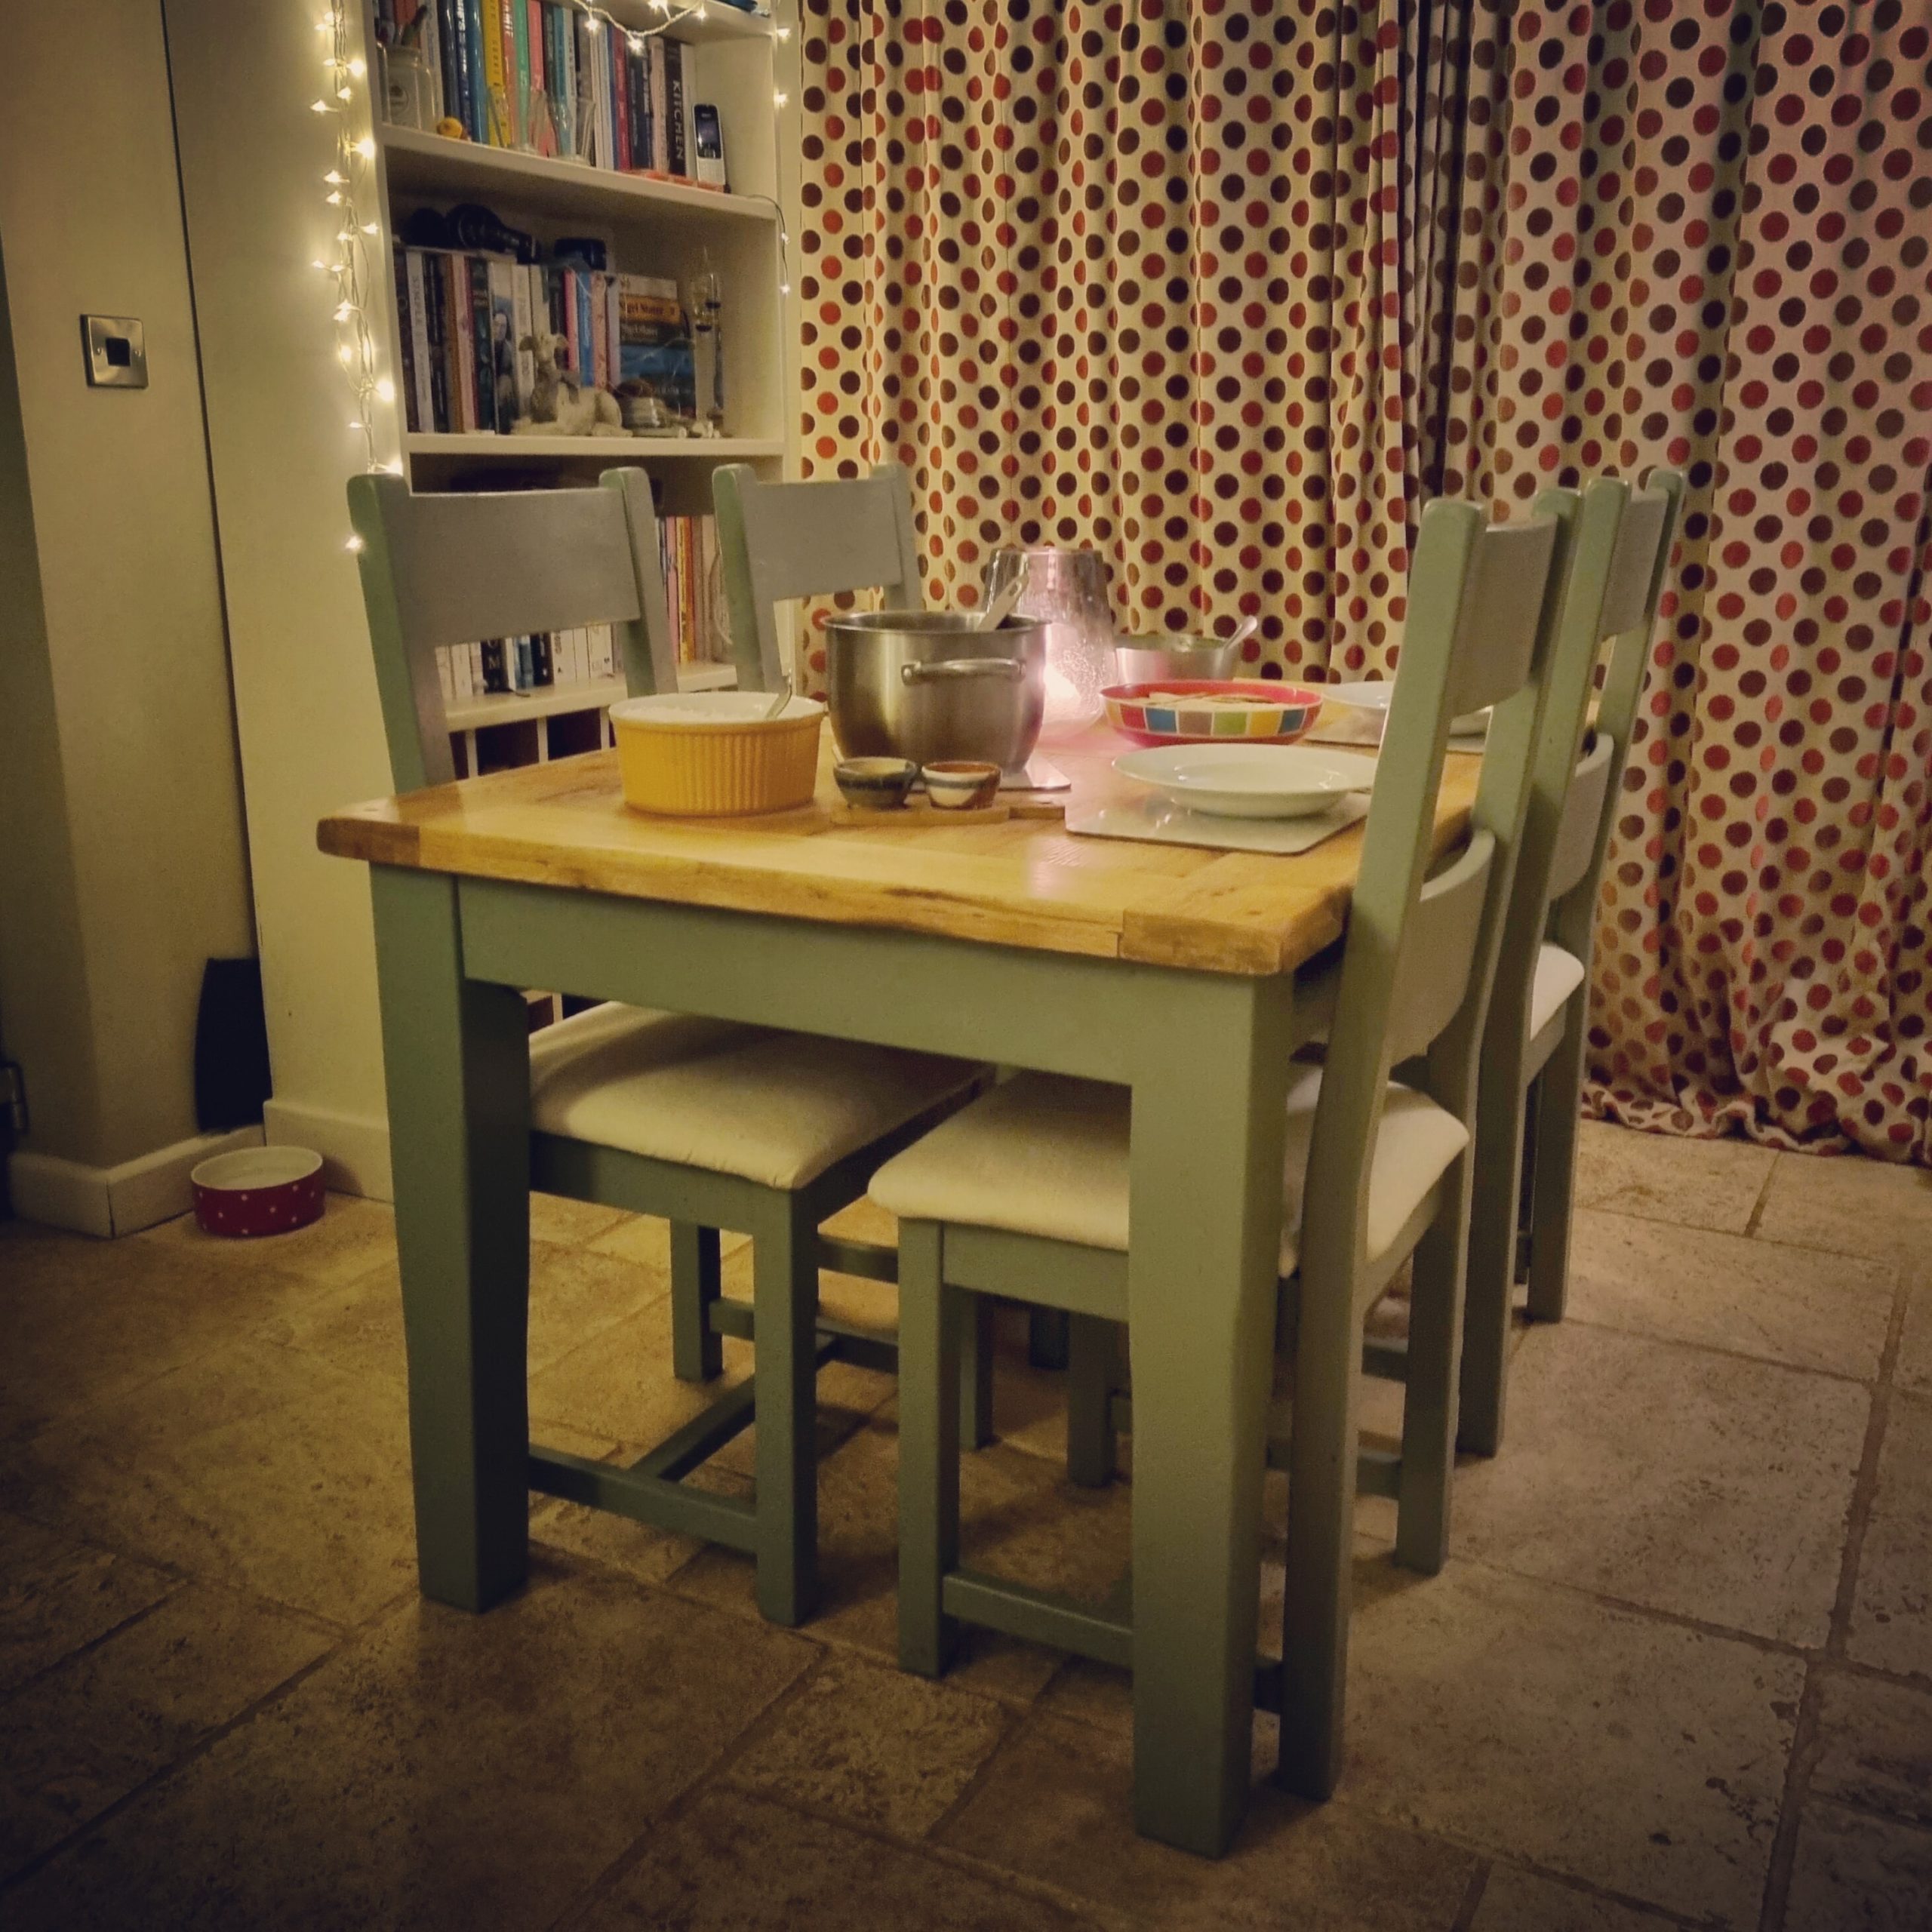 Farmhouse kitchen table and chairs